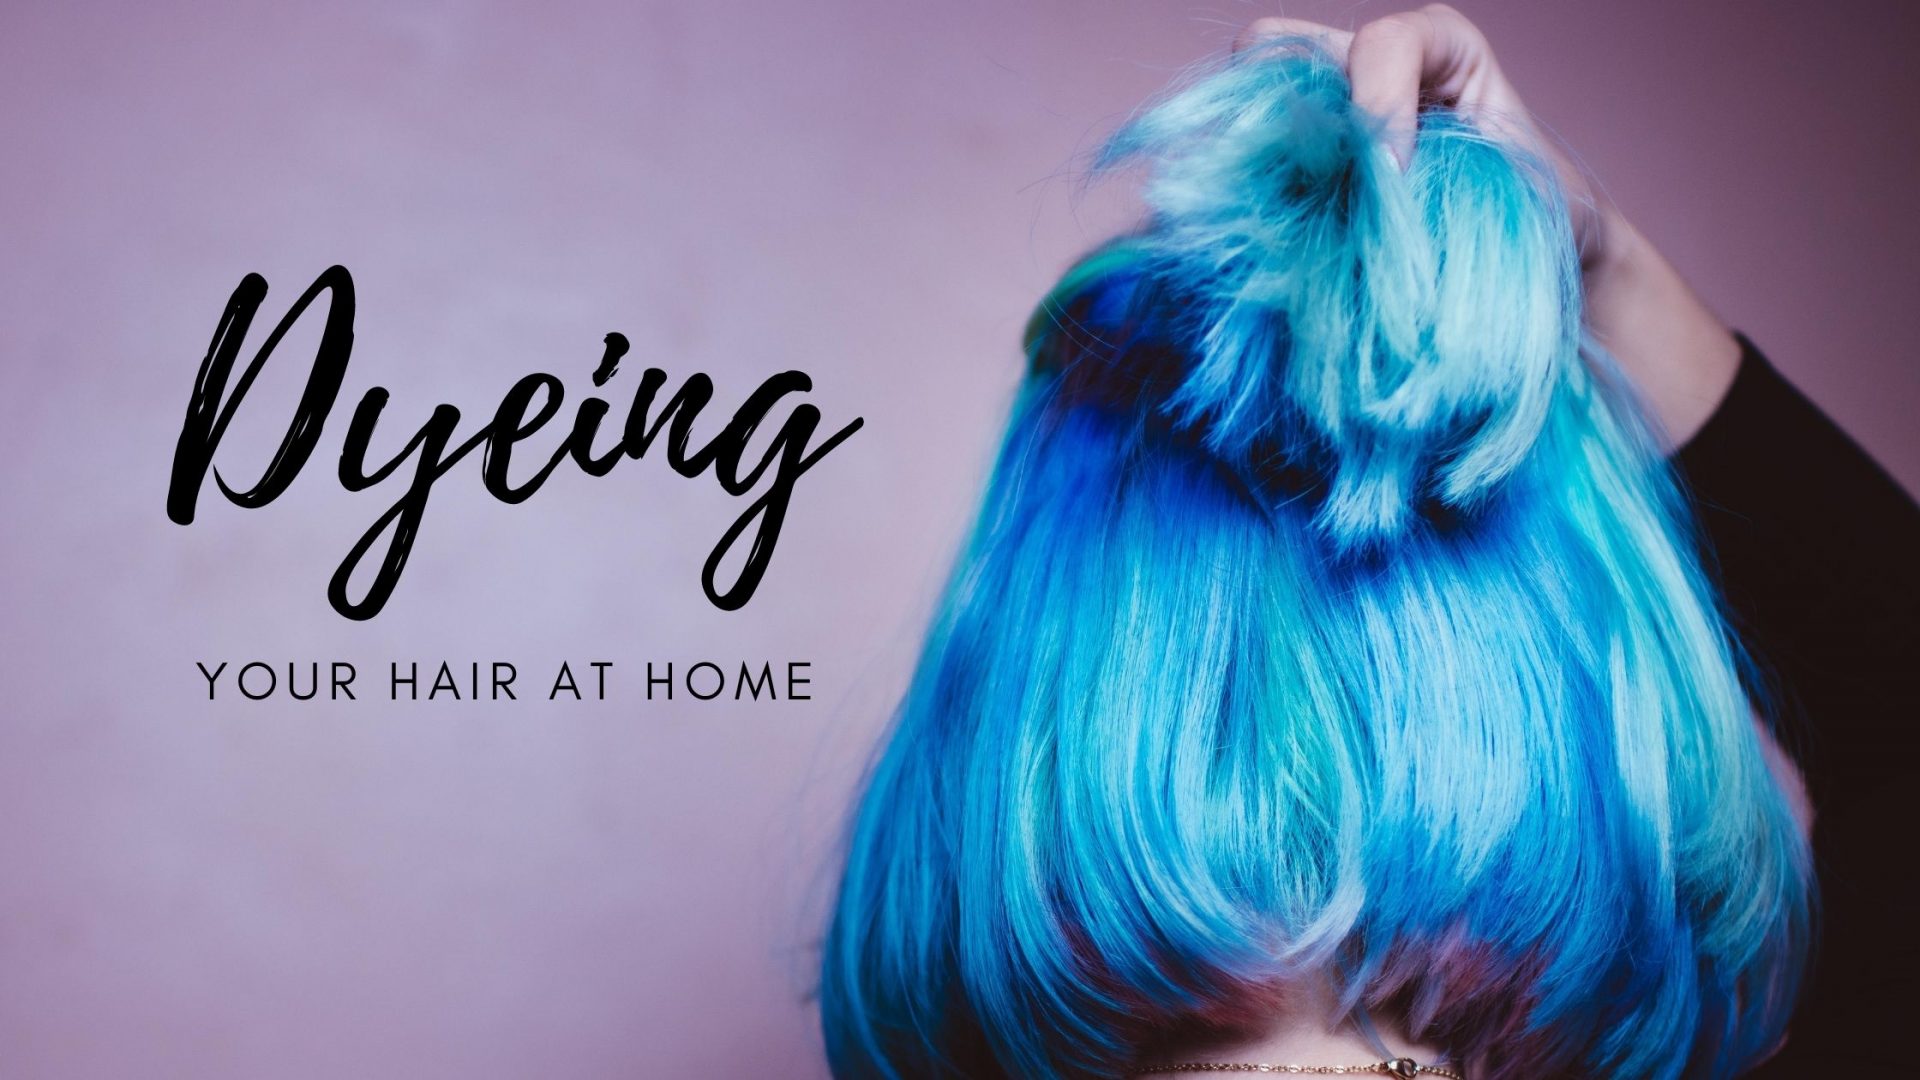 4 Things You Need to Have Before Dyeing Your Hair at Home